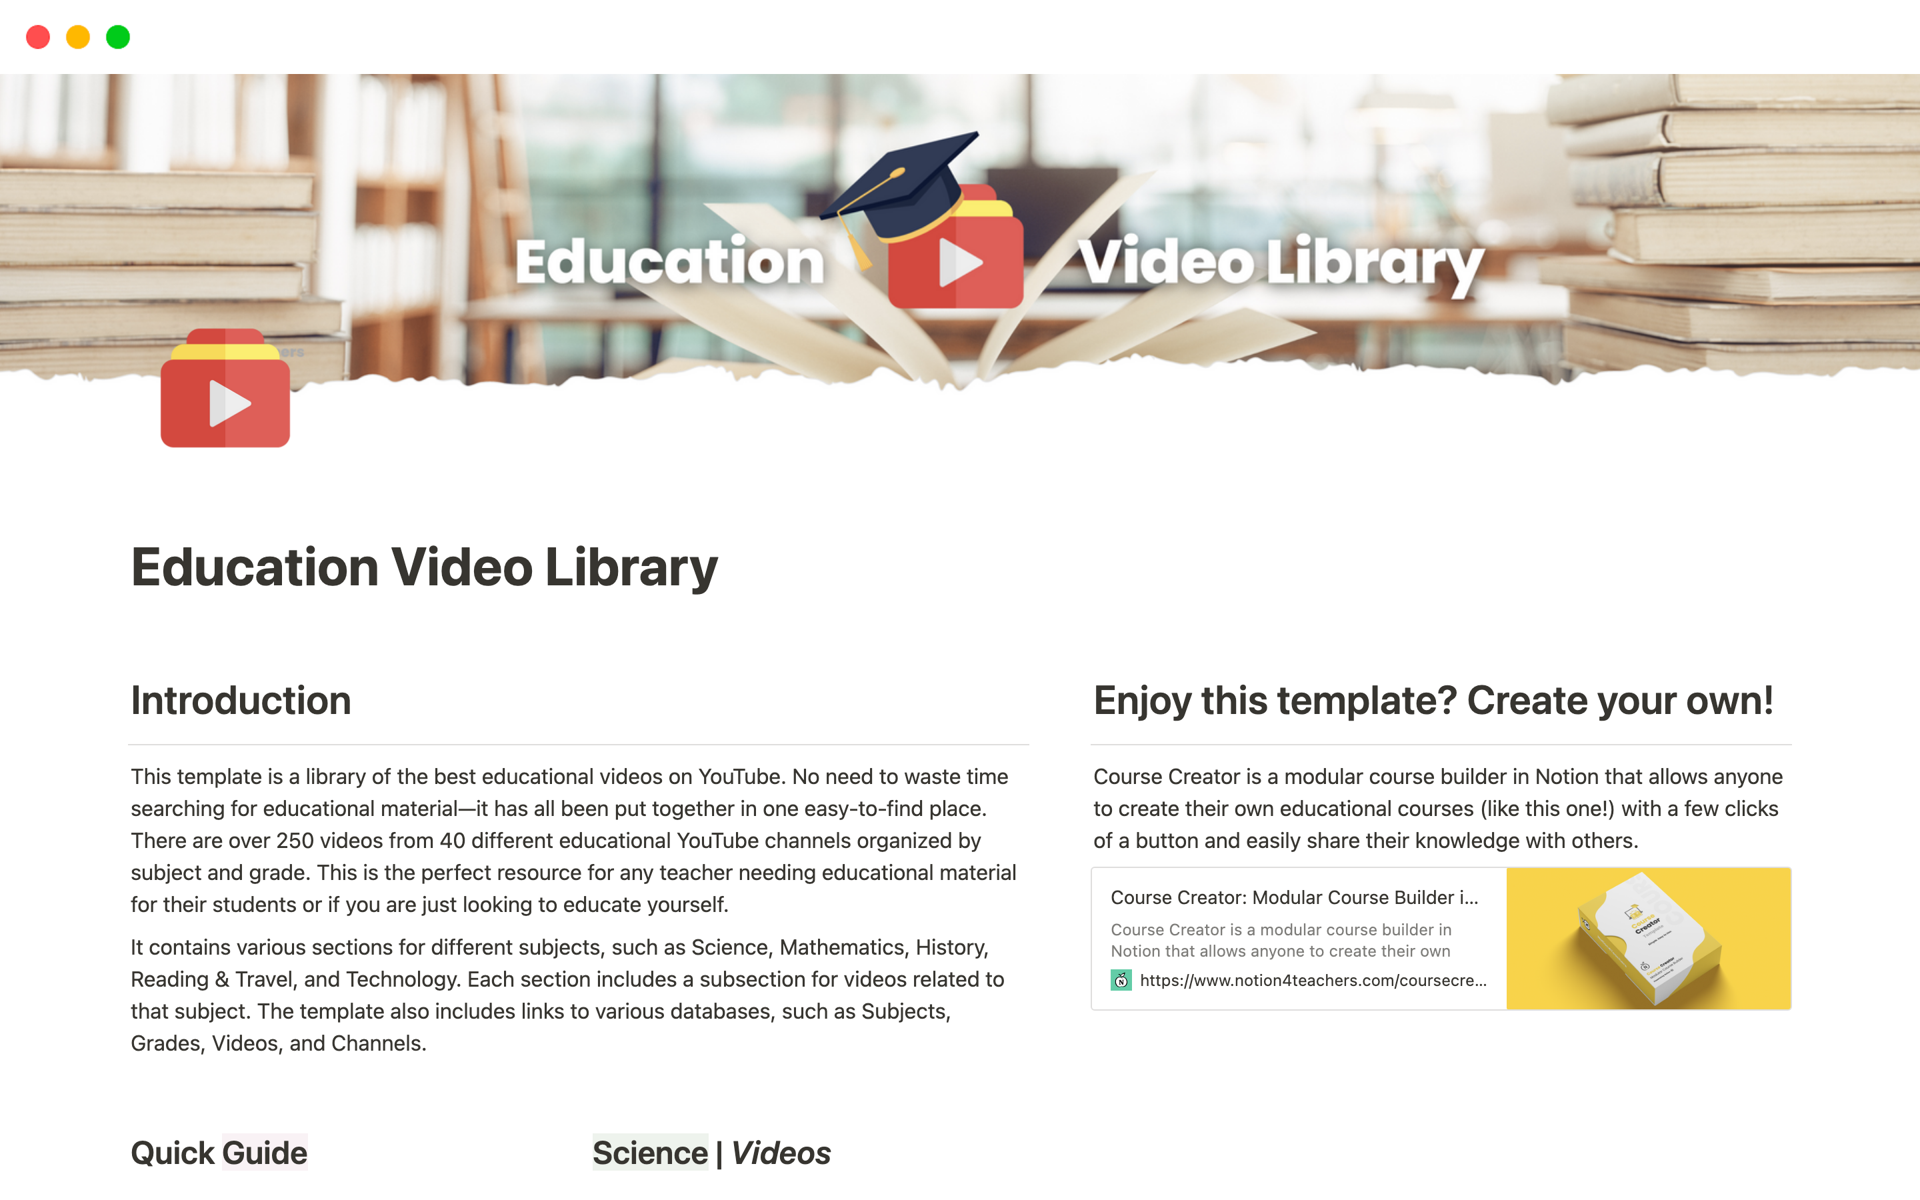 This template is a library of the best educational videos on YouTube with over 250 videos from 40 different educational YouTube channels organized by subject and grade.